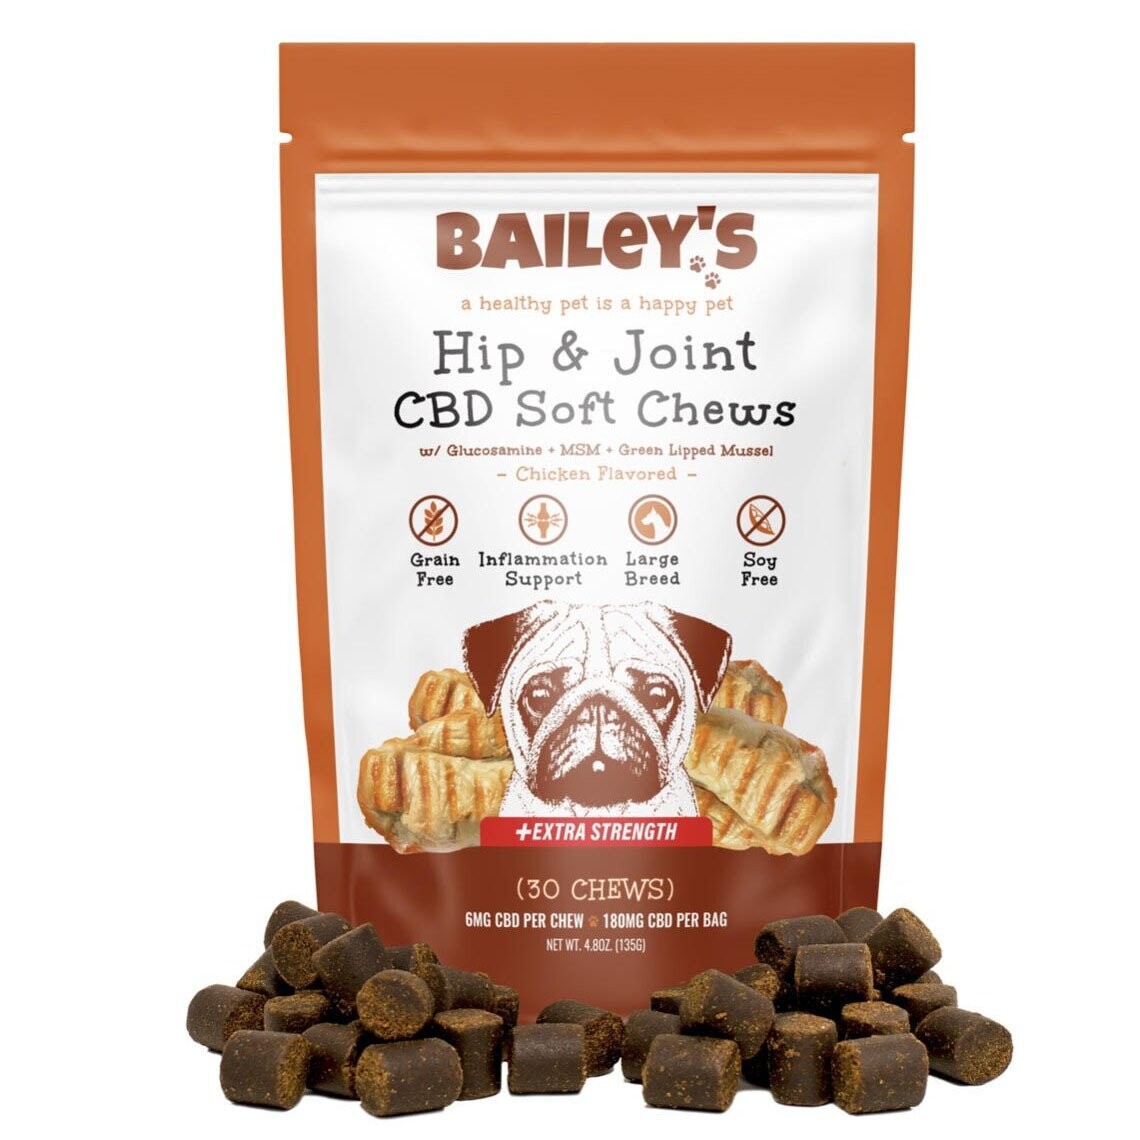 Bailey's Chicken Flavored Hip & Joint Extra Strength CBD Soft Chews Large Breeds, 30 Count Bag w/ 6 MG CBD Per Chew